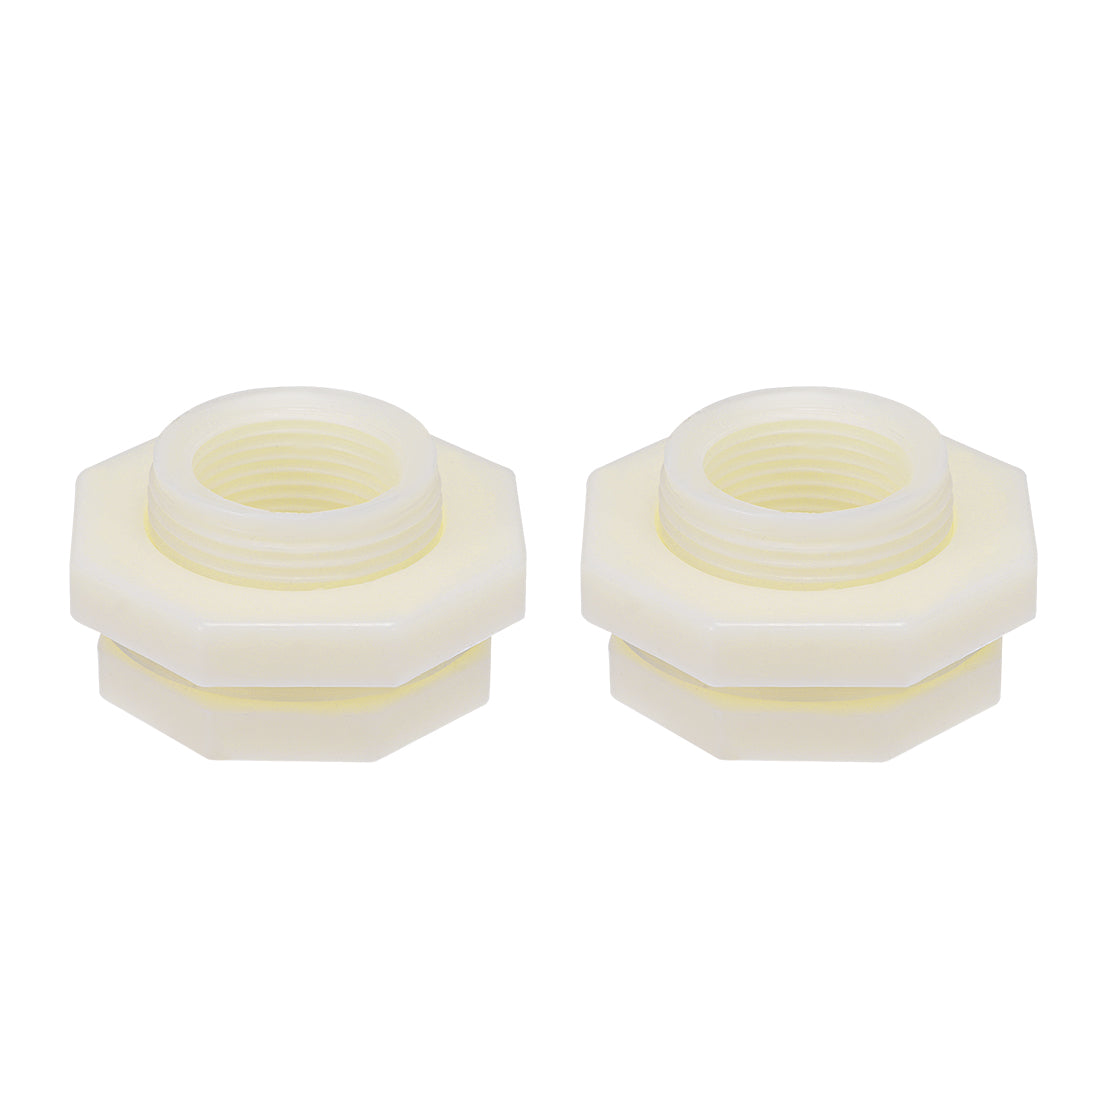 uxcell Uxcell ABS Bulkhead Tank Fitting Adapter for Rain Bucket Aquariums Water Tanks Ponds G1 Female 2Pcs